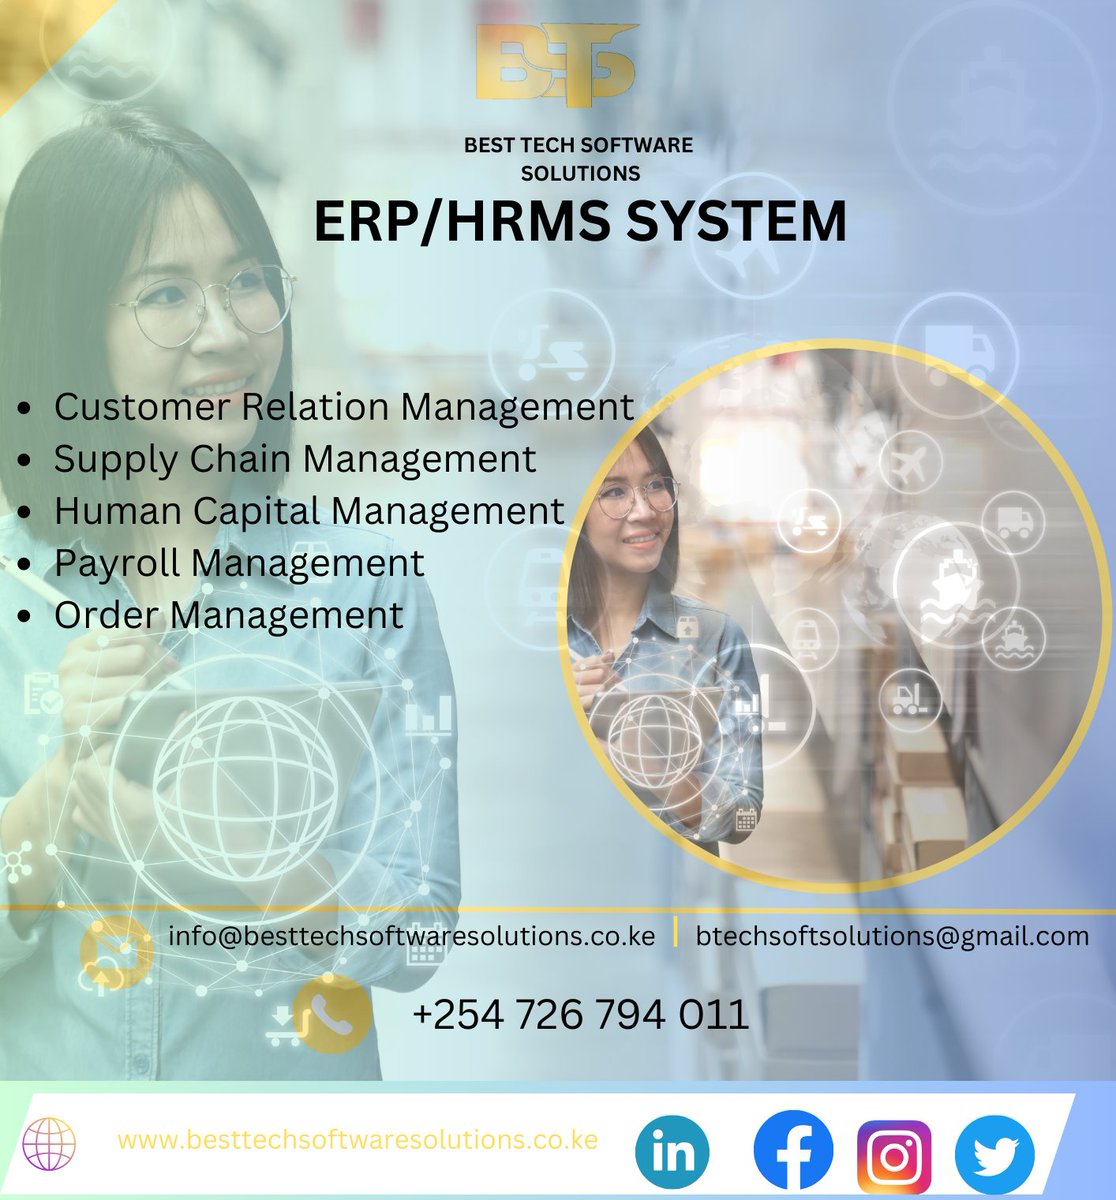 Streamline Your HR Operations and Optimize Business Processes with our ERP HRM System! Overcome HR Challenges and Maximize Productivity.
Call 0726794011 #MainaAndKingangi #WWDC23 #WorldEnvironmentDay #BeatPlasticPollution Apple #DigitallyFitsAwardsKE